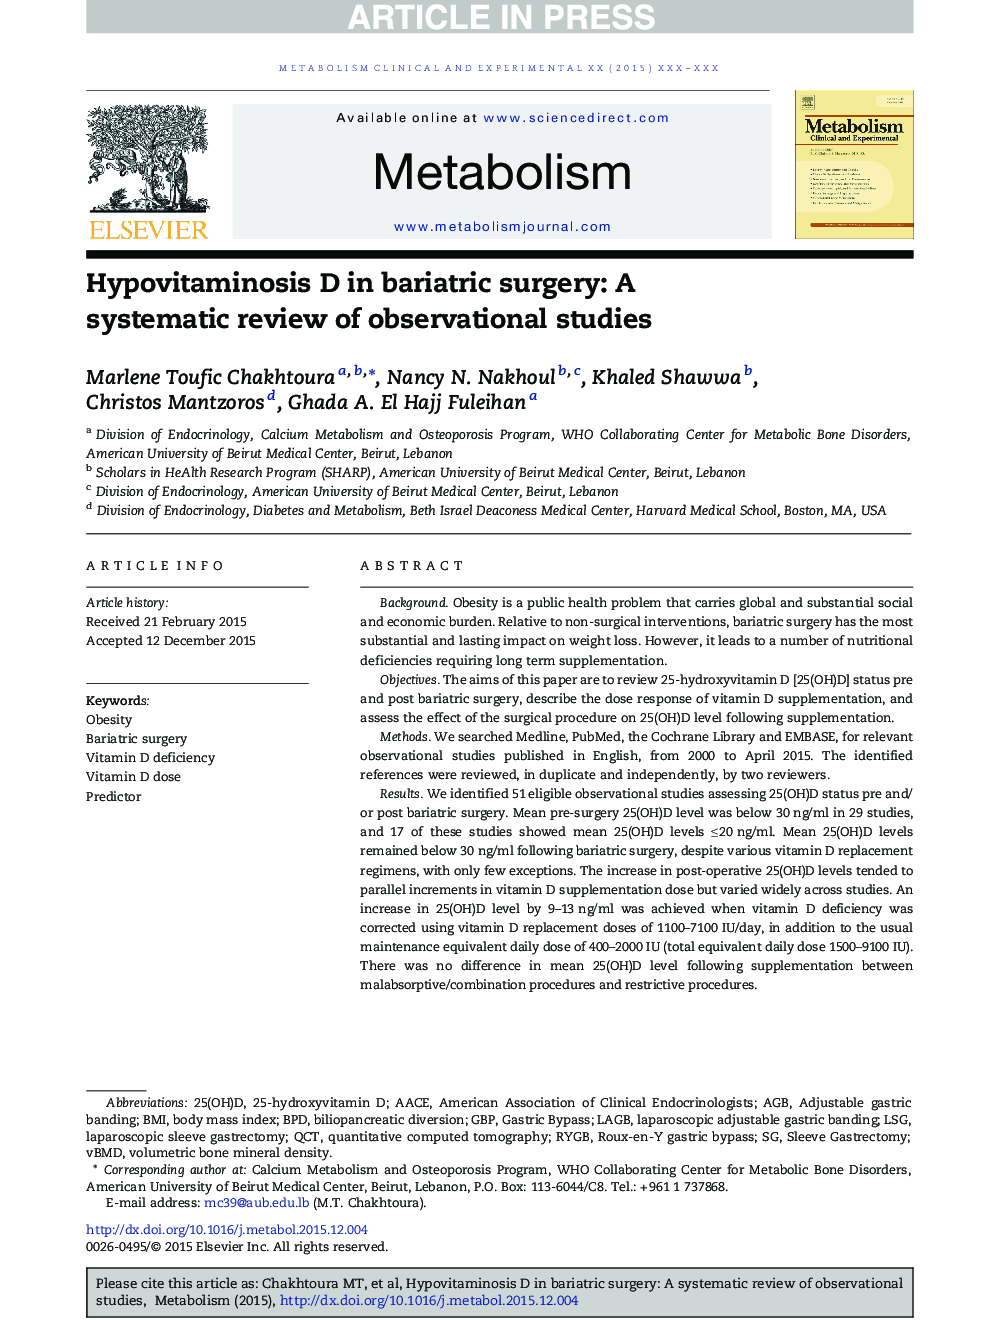 Hypovitaminosis D in bariatric surgery: A systematic review of observational studies